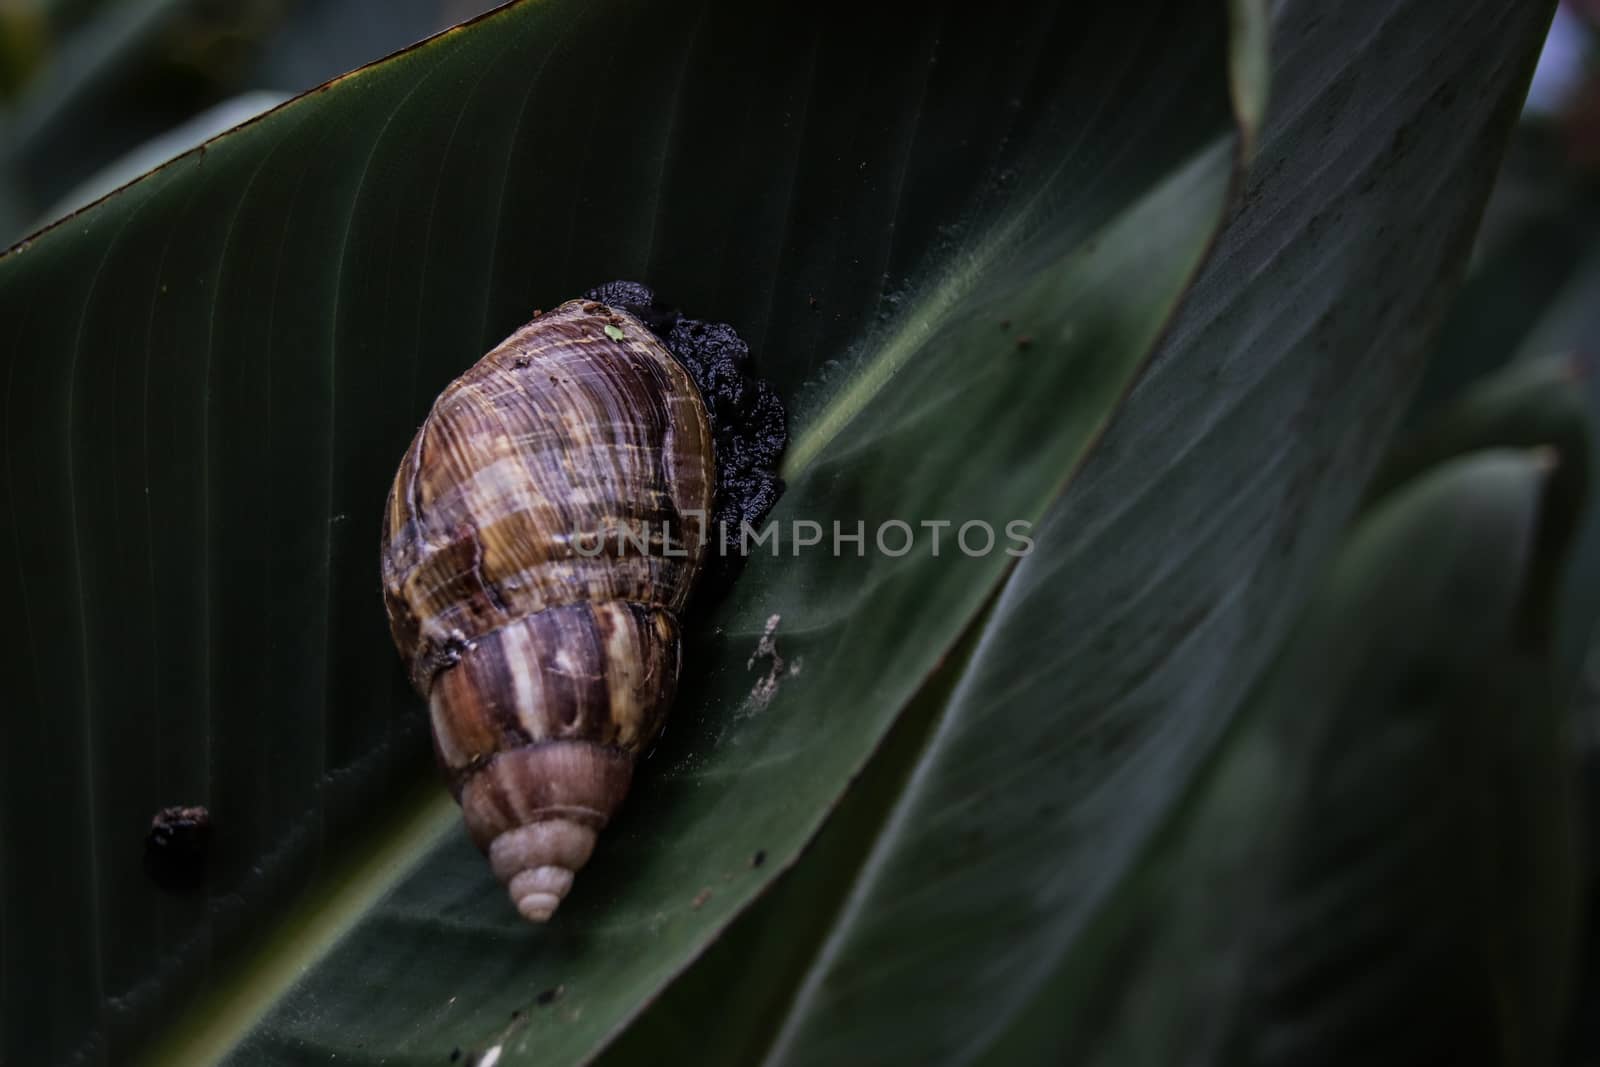 Achatina fulica or Giant african land snail agains dark green tropical leaves